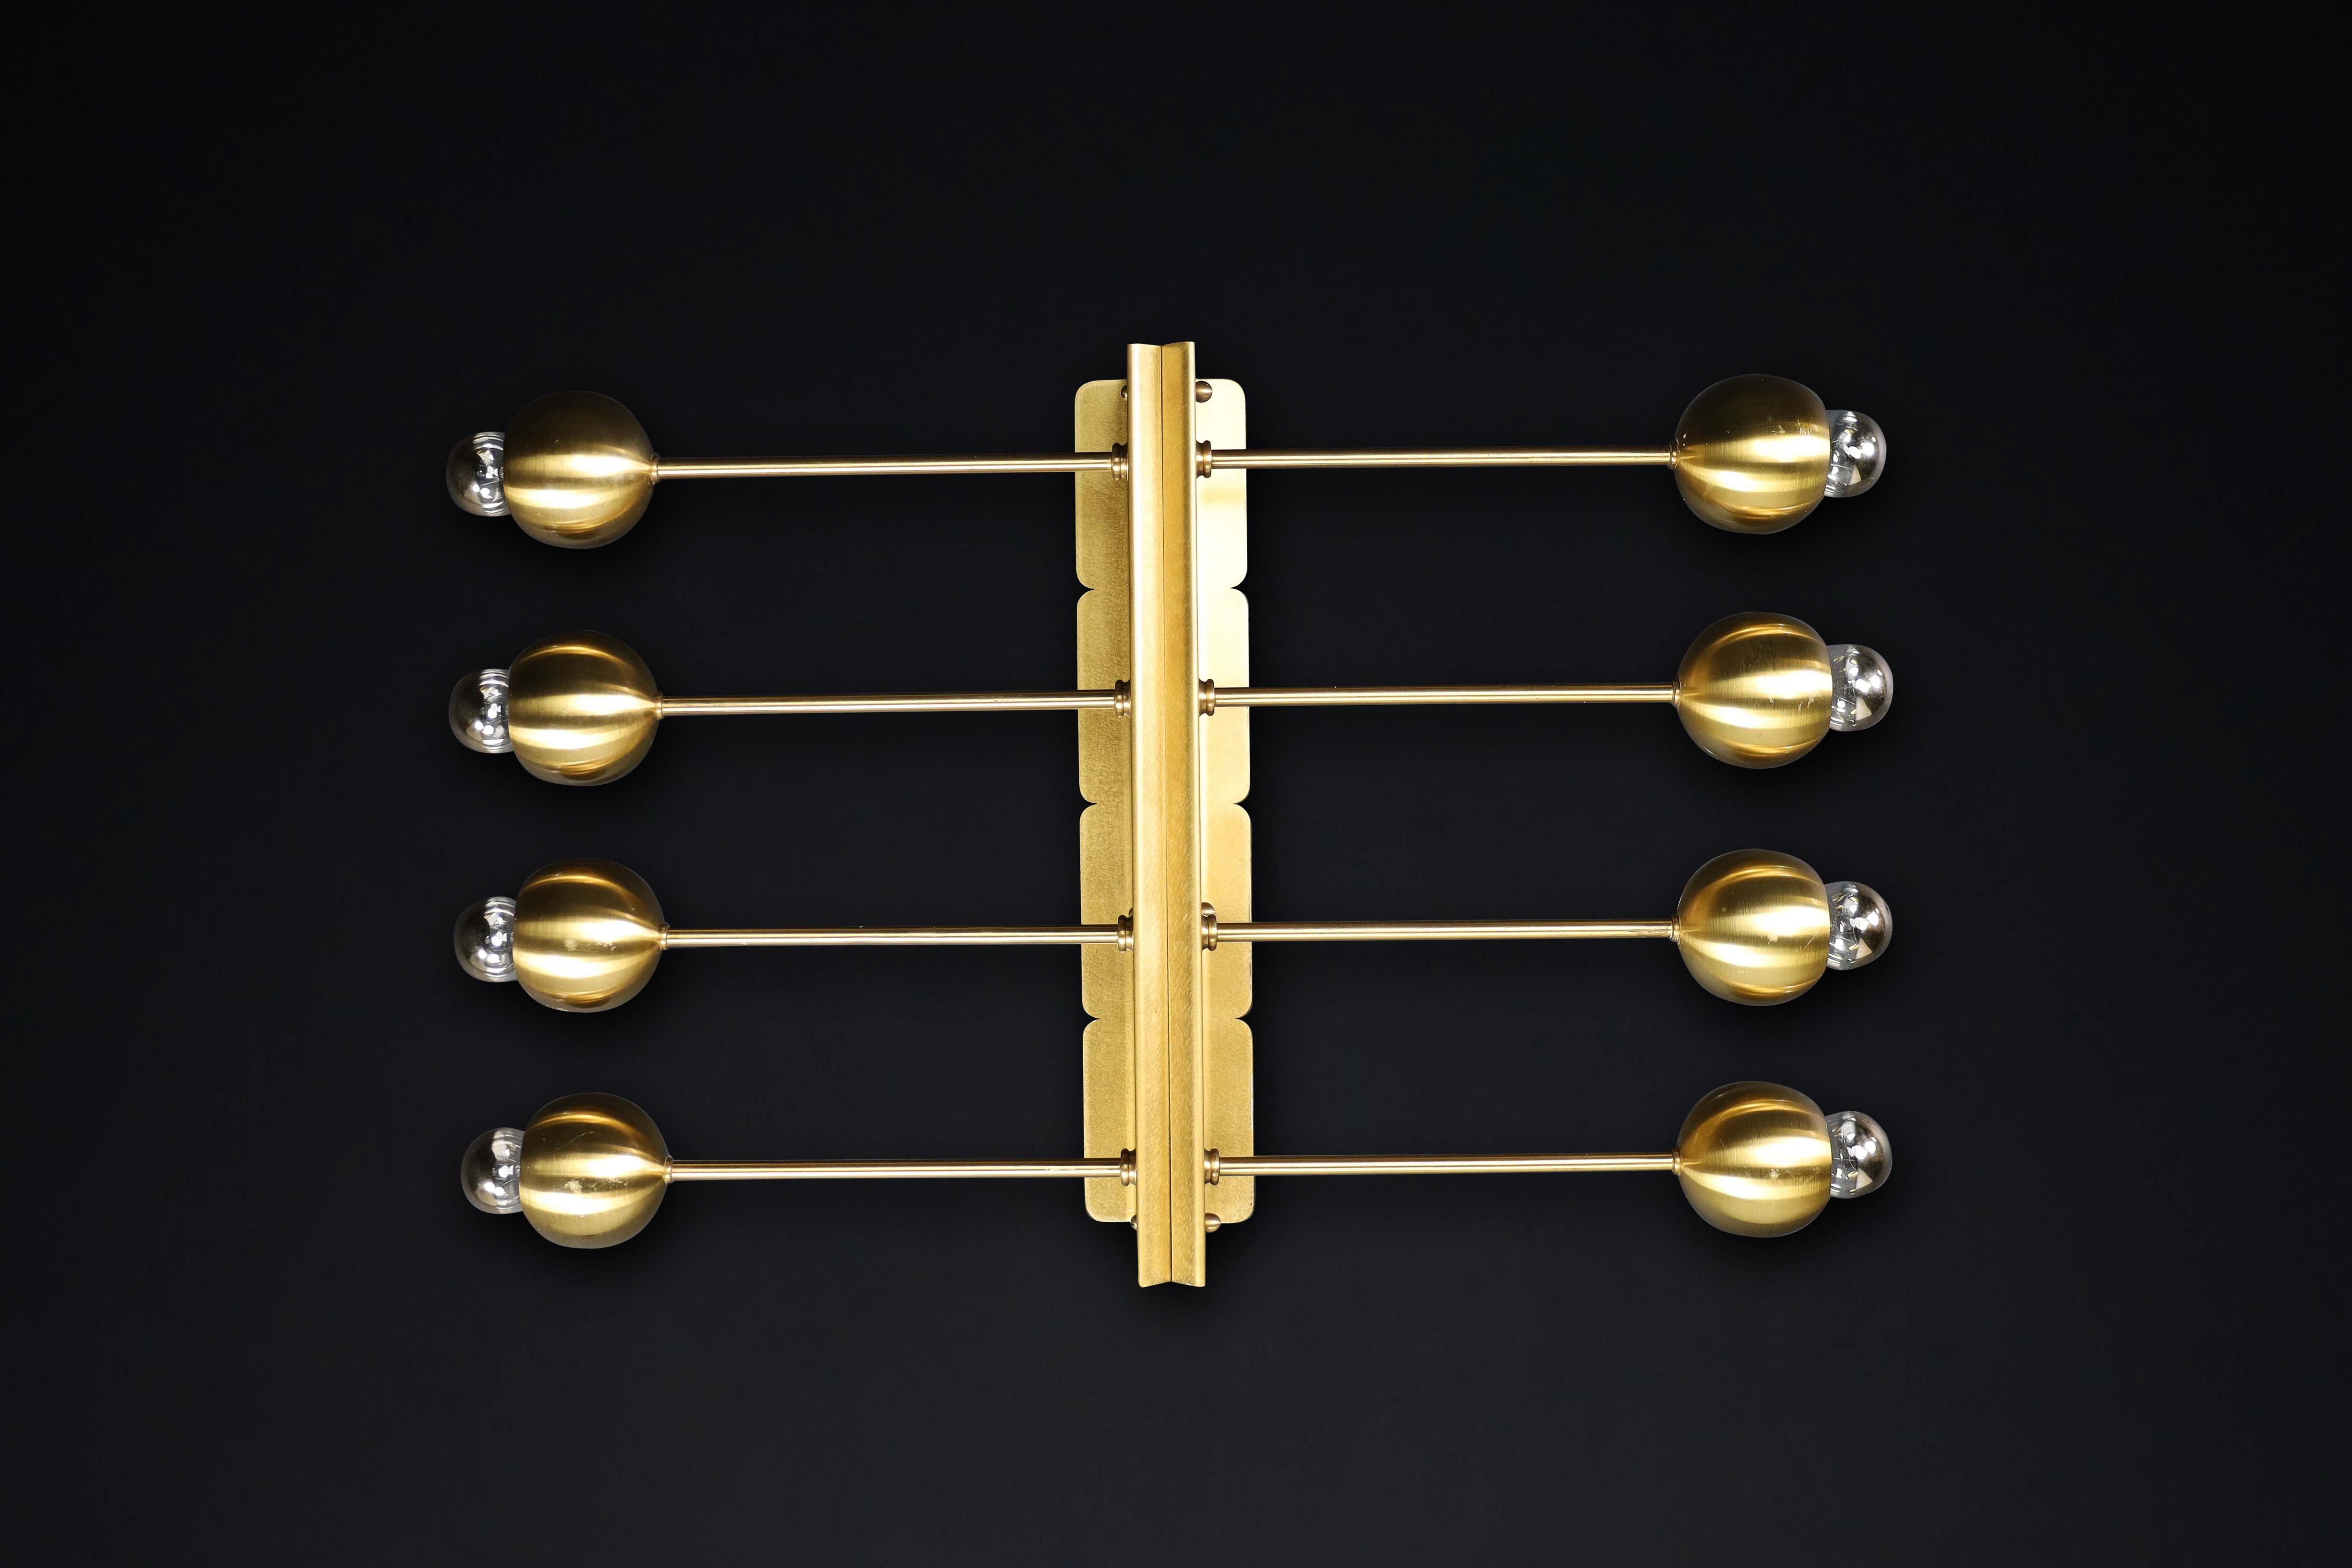 Midcentury Wall Lights in Brass Italy 1960s

This is a set of wall lights/sconces/ceiling lights with brass fixtures produced and designed in Italy during the 1960s. The lights feature a beautiful fixture constructed of elegantly shaped brass